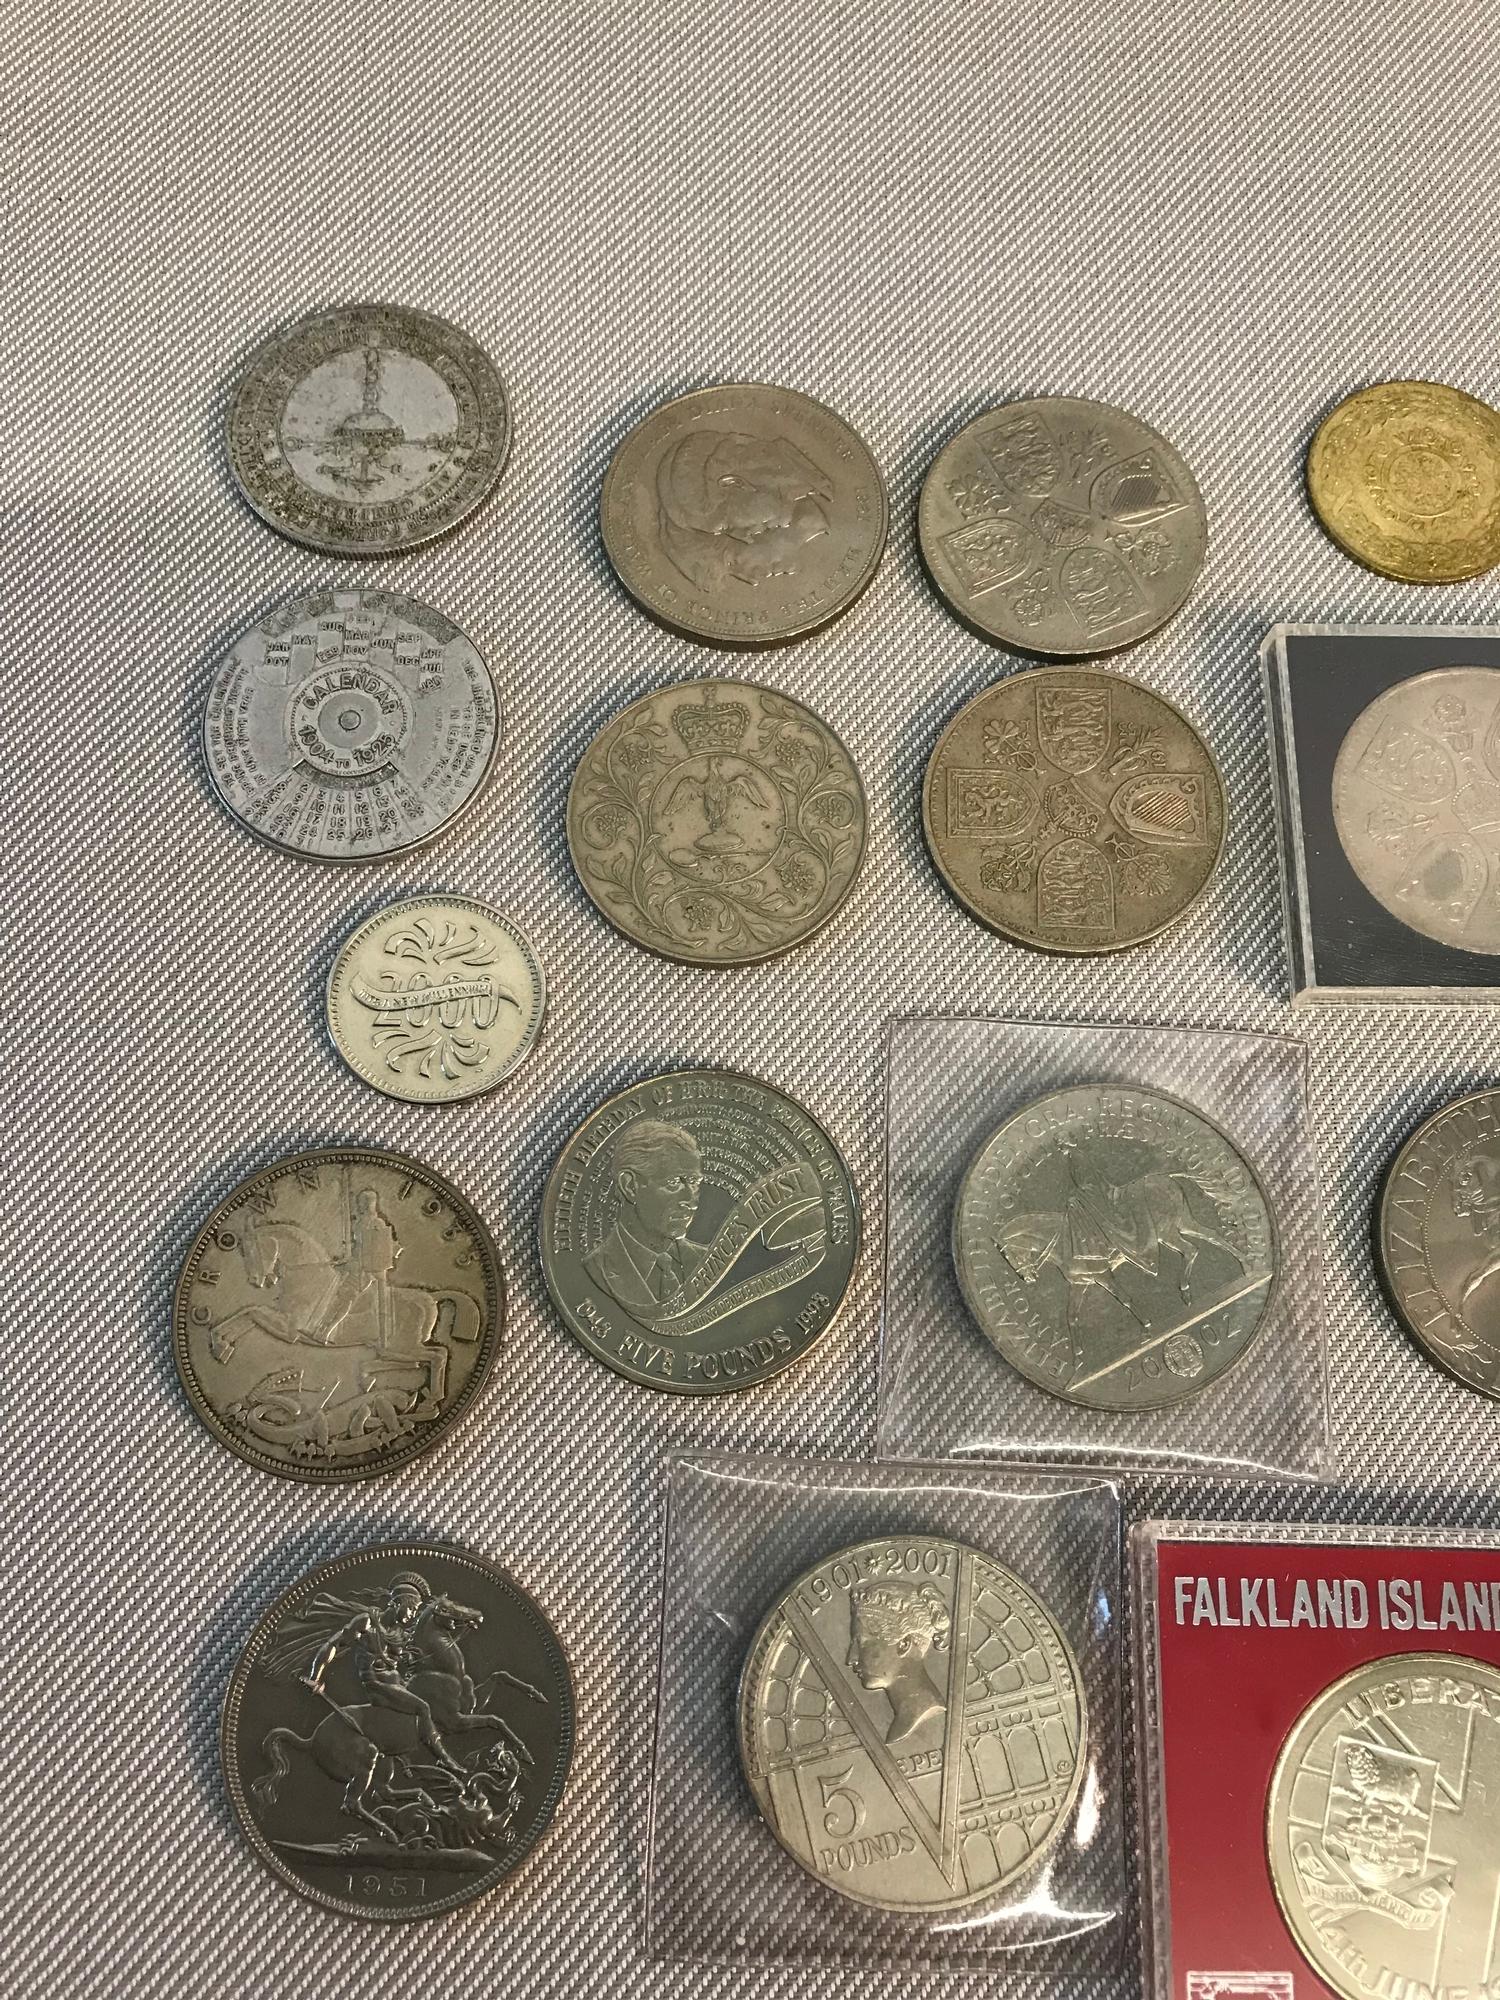 Collection of coins to include 3 five pound coins, 1951 George and the dragon crown, 1935 George and - Image 2 of 3